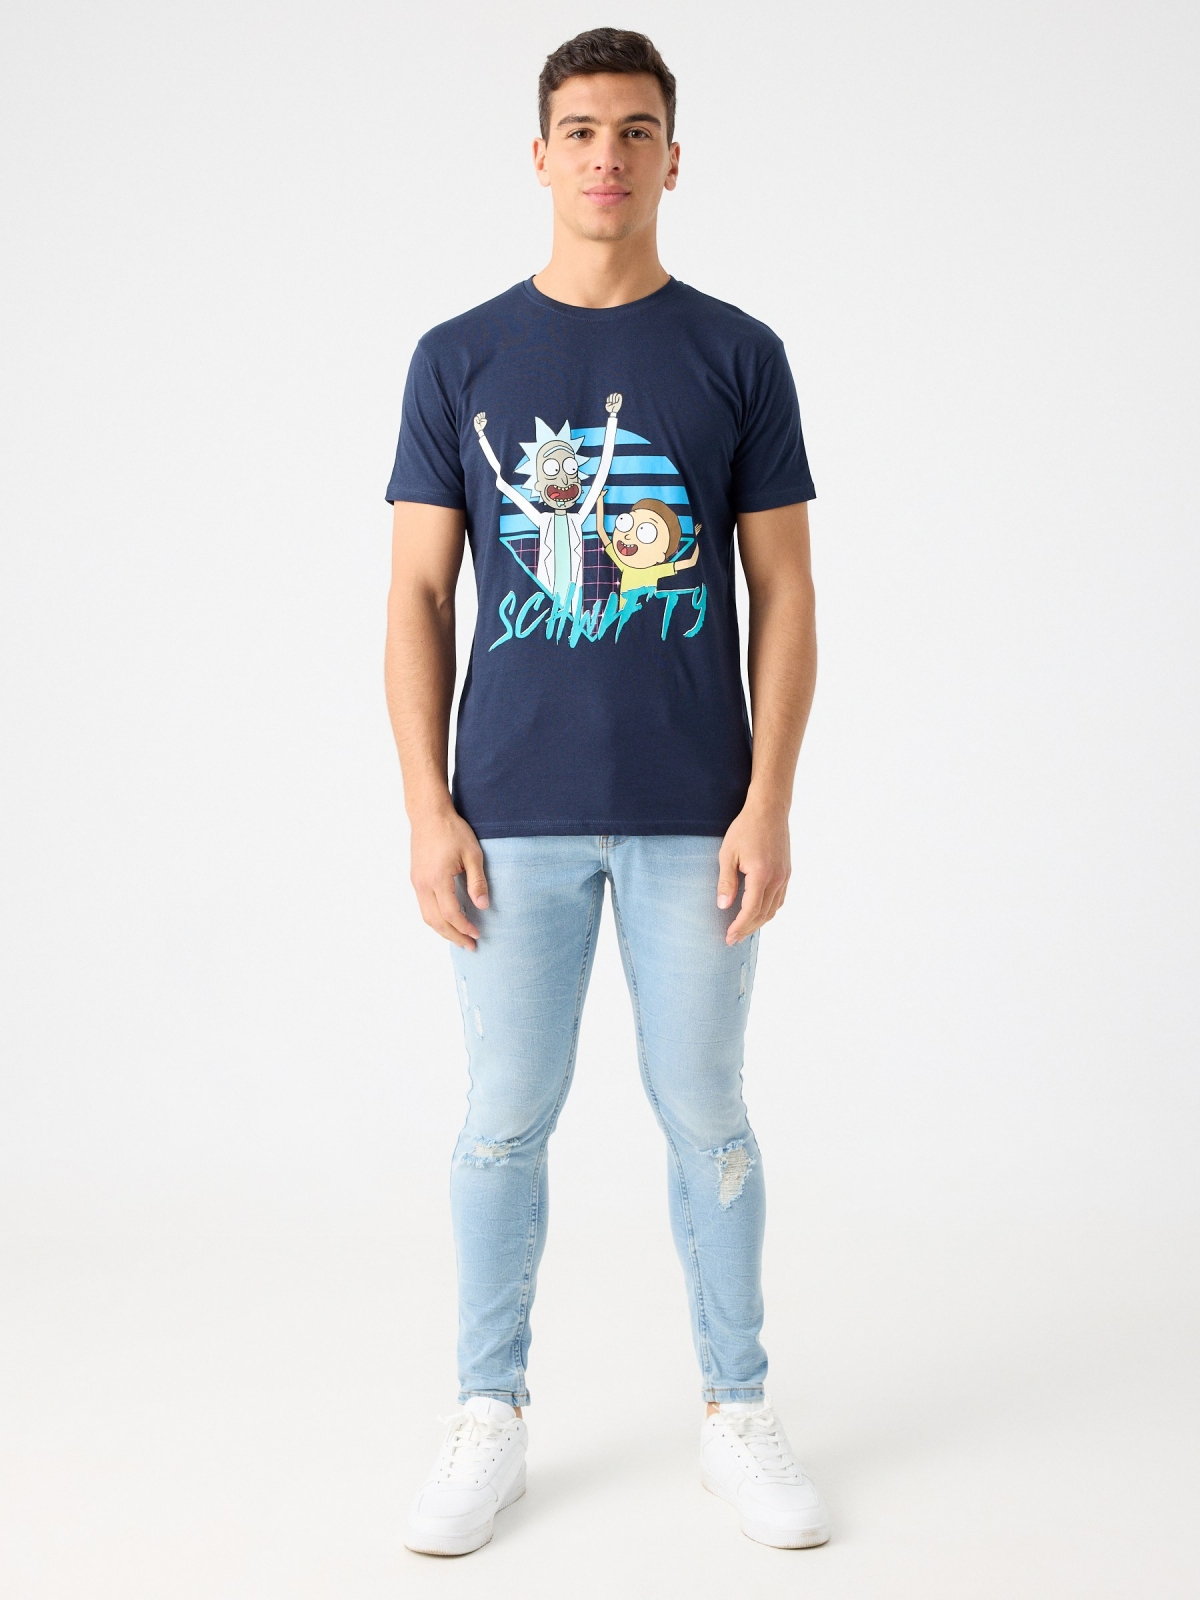 Rick and Morty print t-shirt navy front view